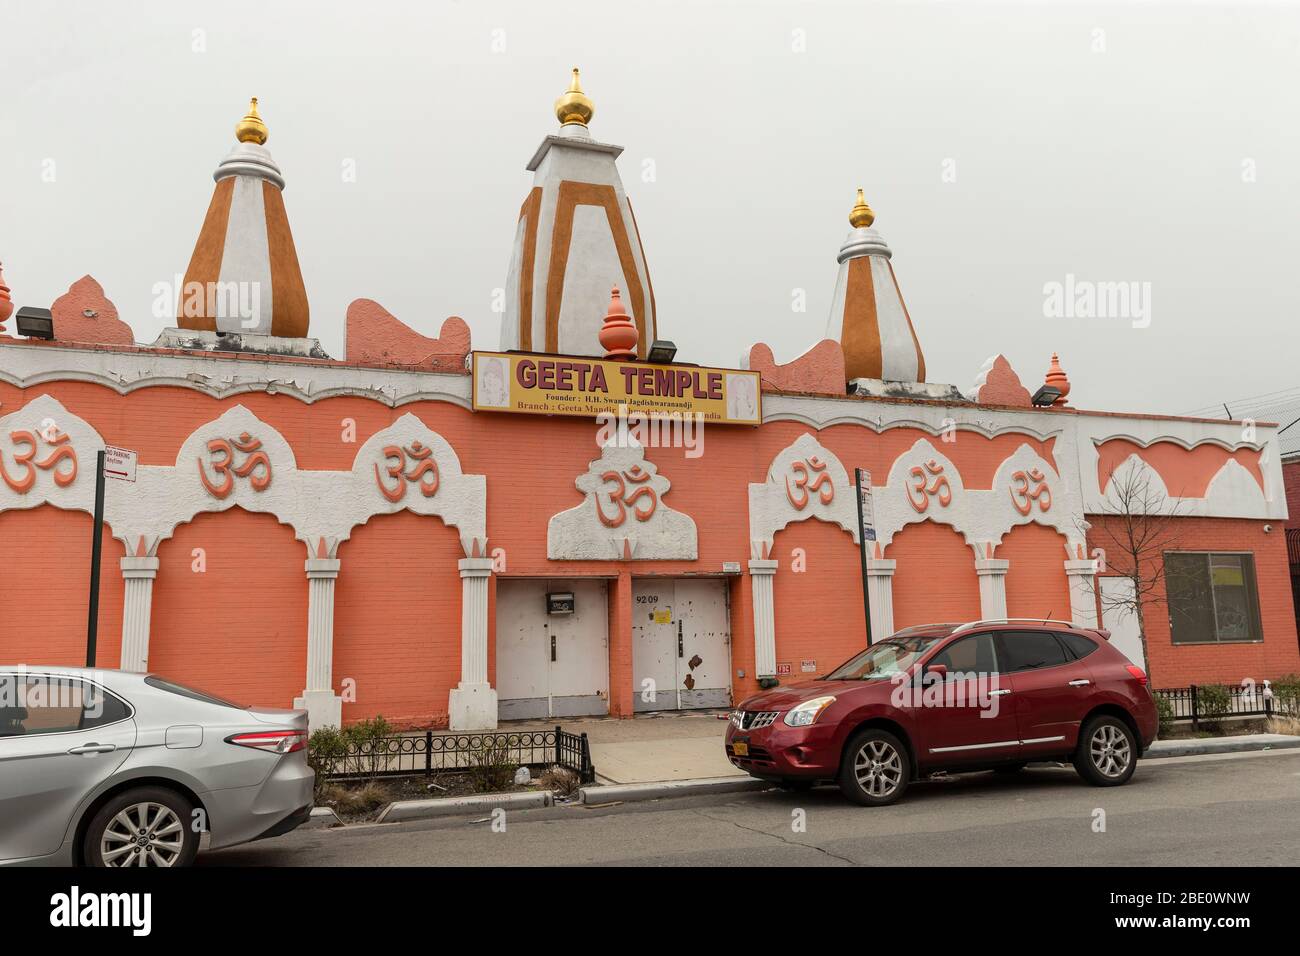 New York, NY - April 10, 2020: View of Geeta Temple closed for prayers because of COVID-19 pandemic in Corona neighborhood of Queens Stock Photo